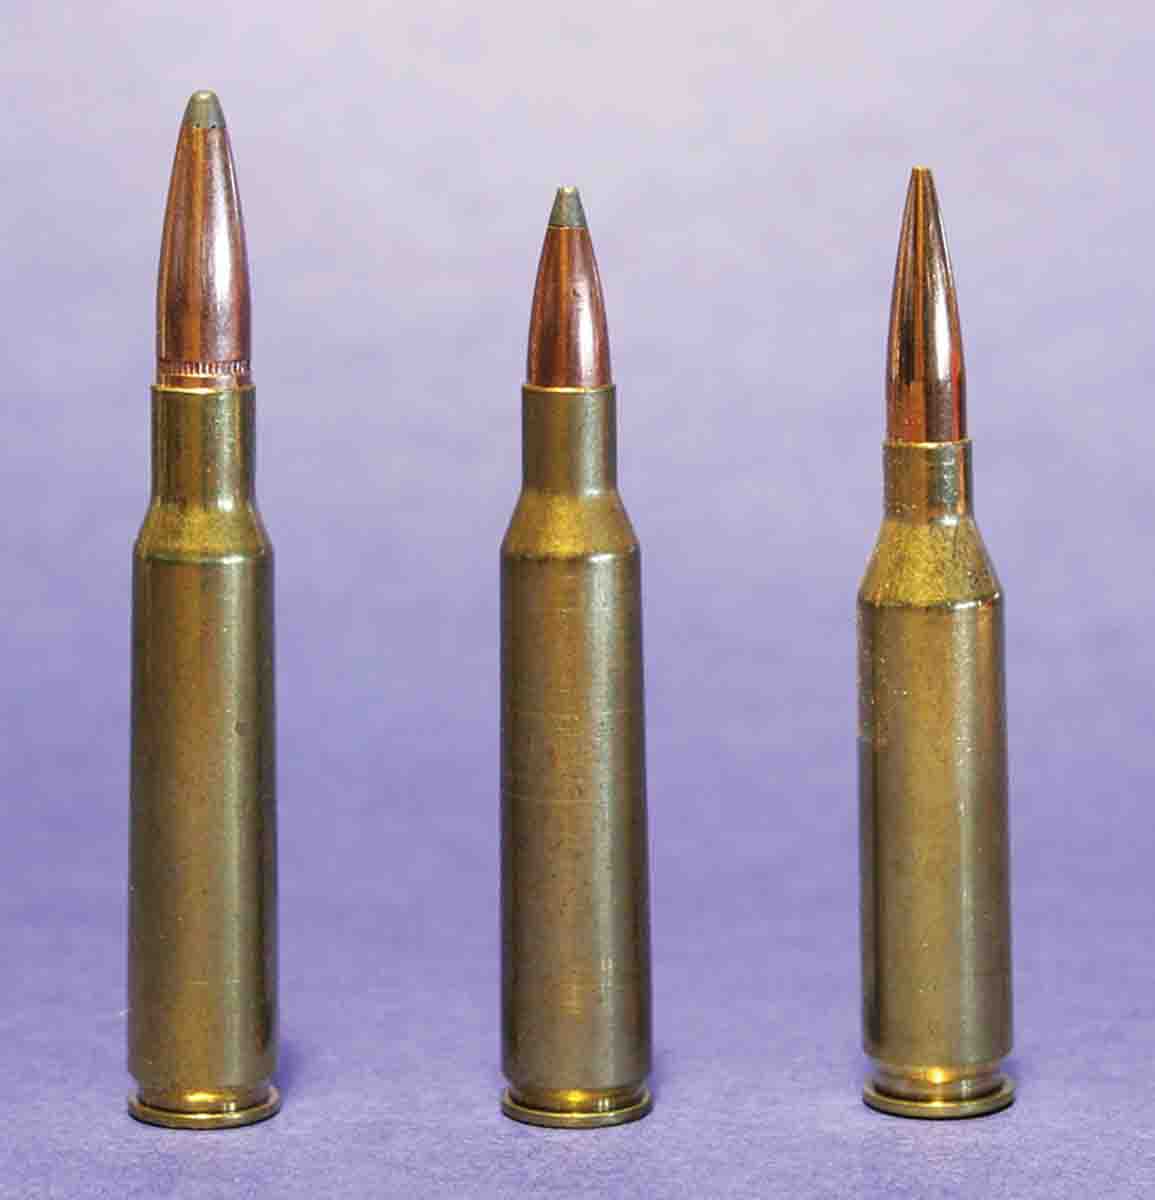 The .257 Roberts (center) introduced by Remington in 1934 was basically the 7x57 Mauser (left) necked down. The .257’s heyday lasted only until 1955, when Winchester introduced the .243 (right).